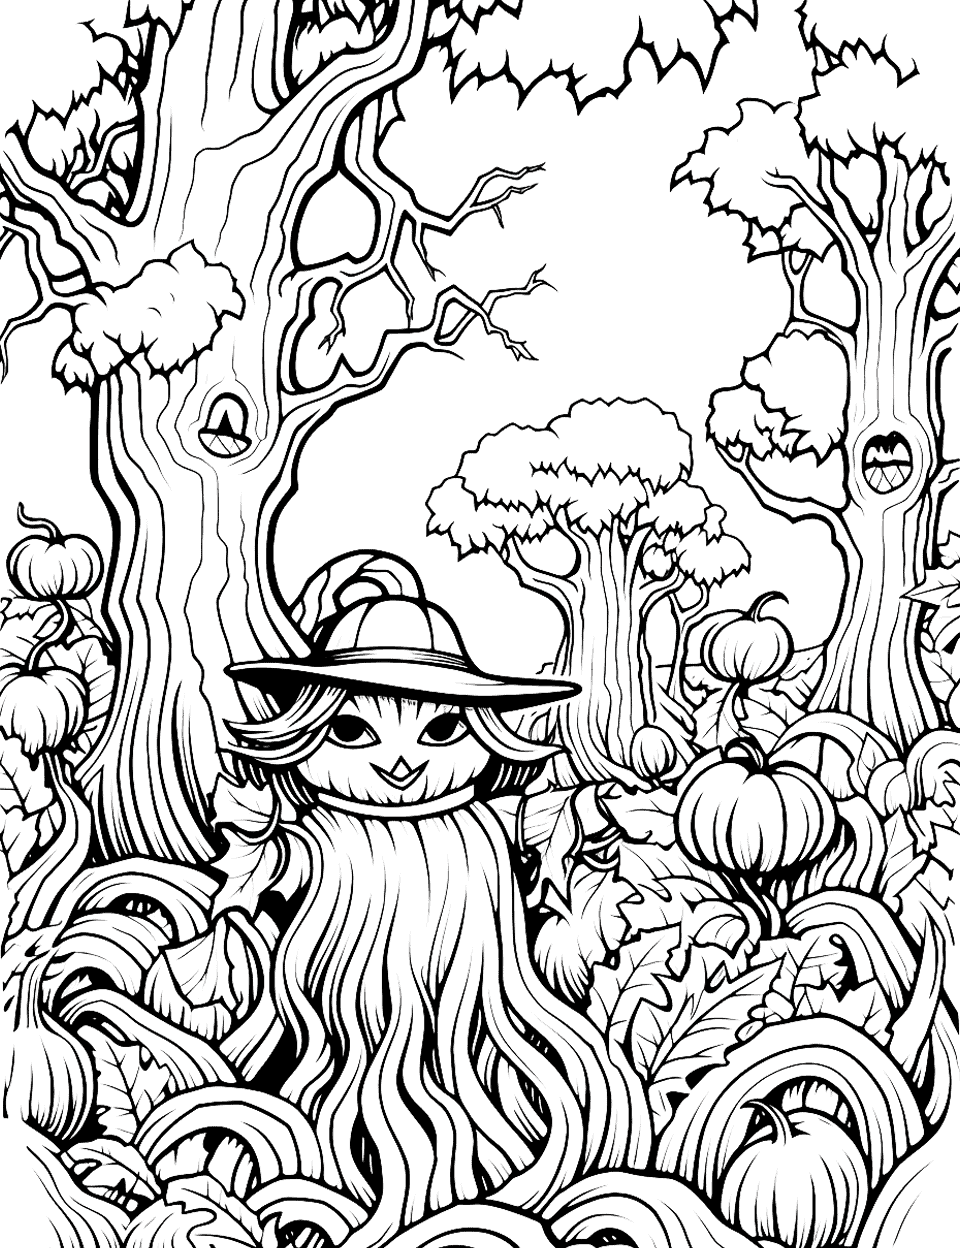 Detailed Haunted Forest Halloween Coloring Page - A detailed, intricate scene of a haunted forest, complete with spooky creatures and creepy trees.